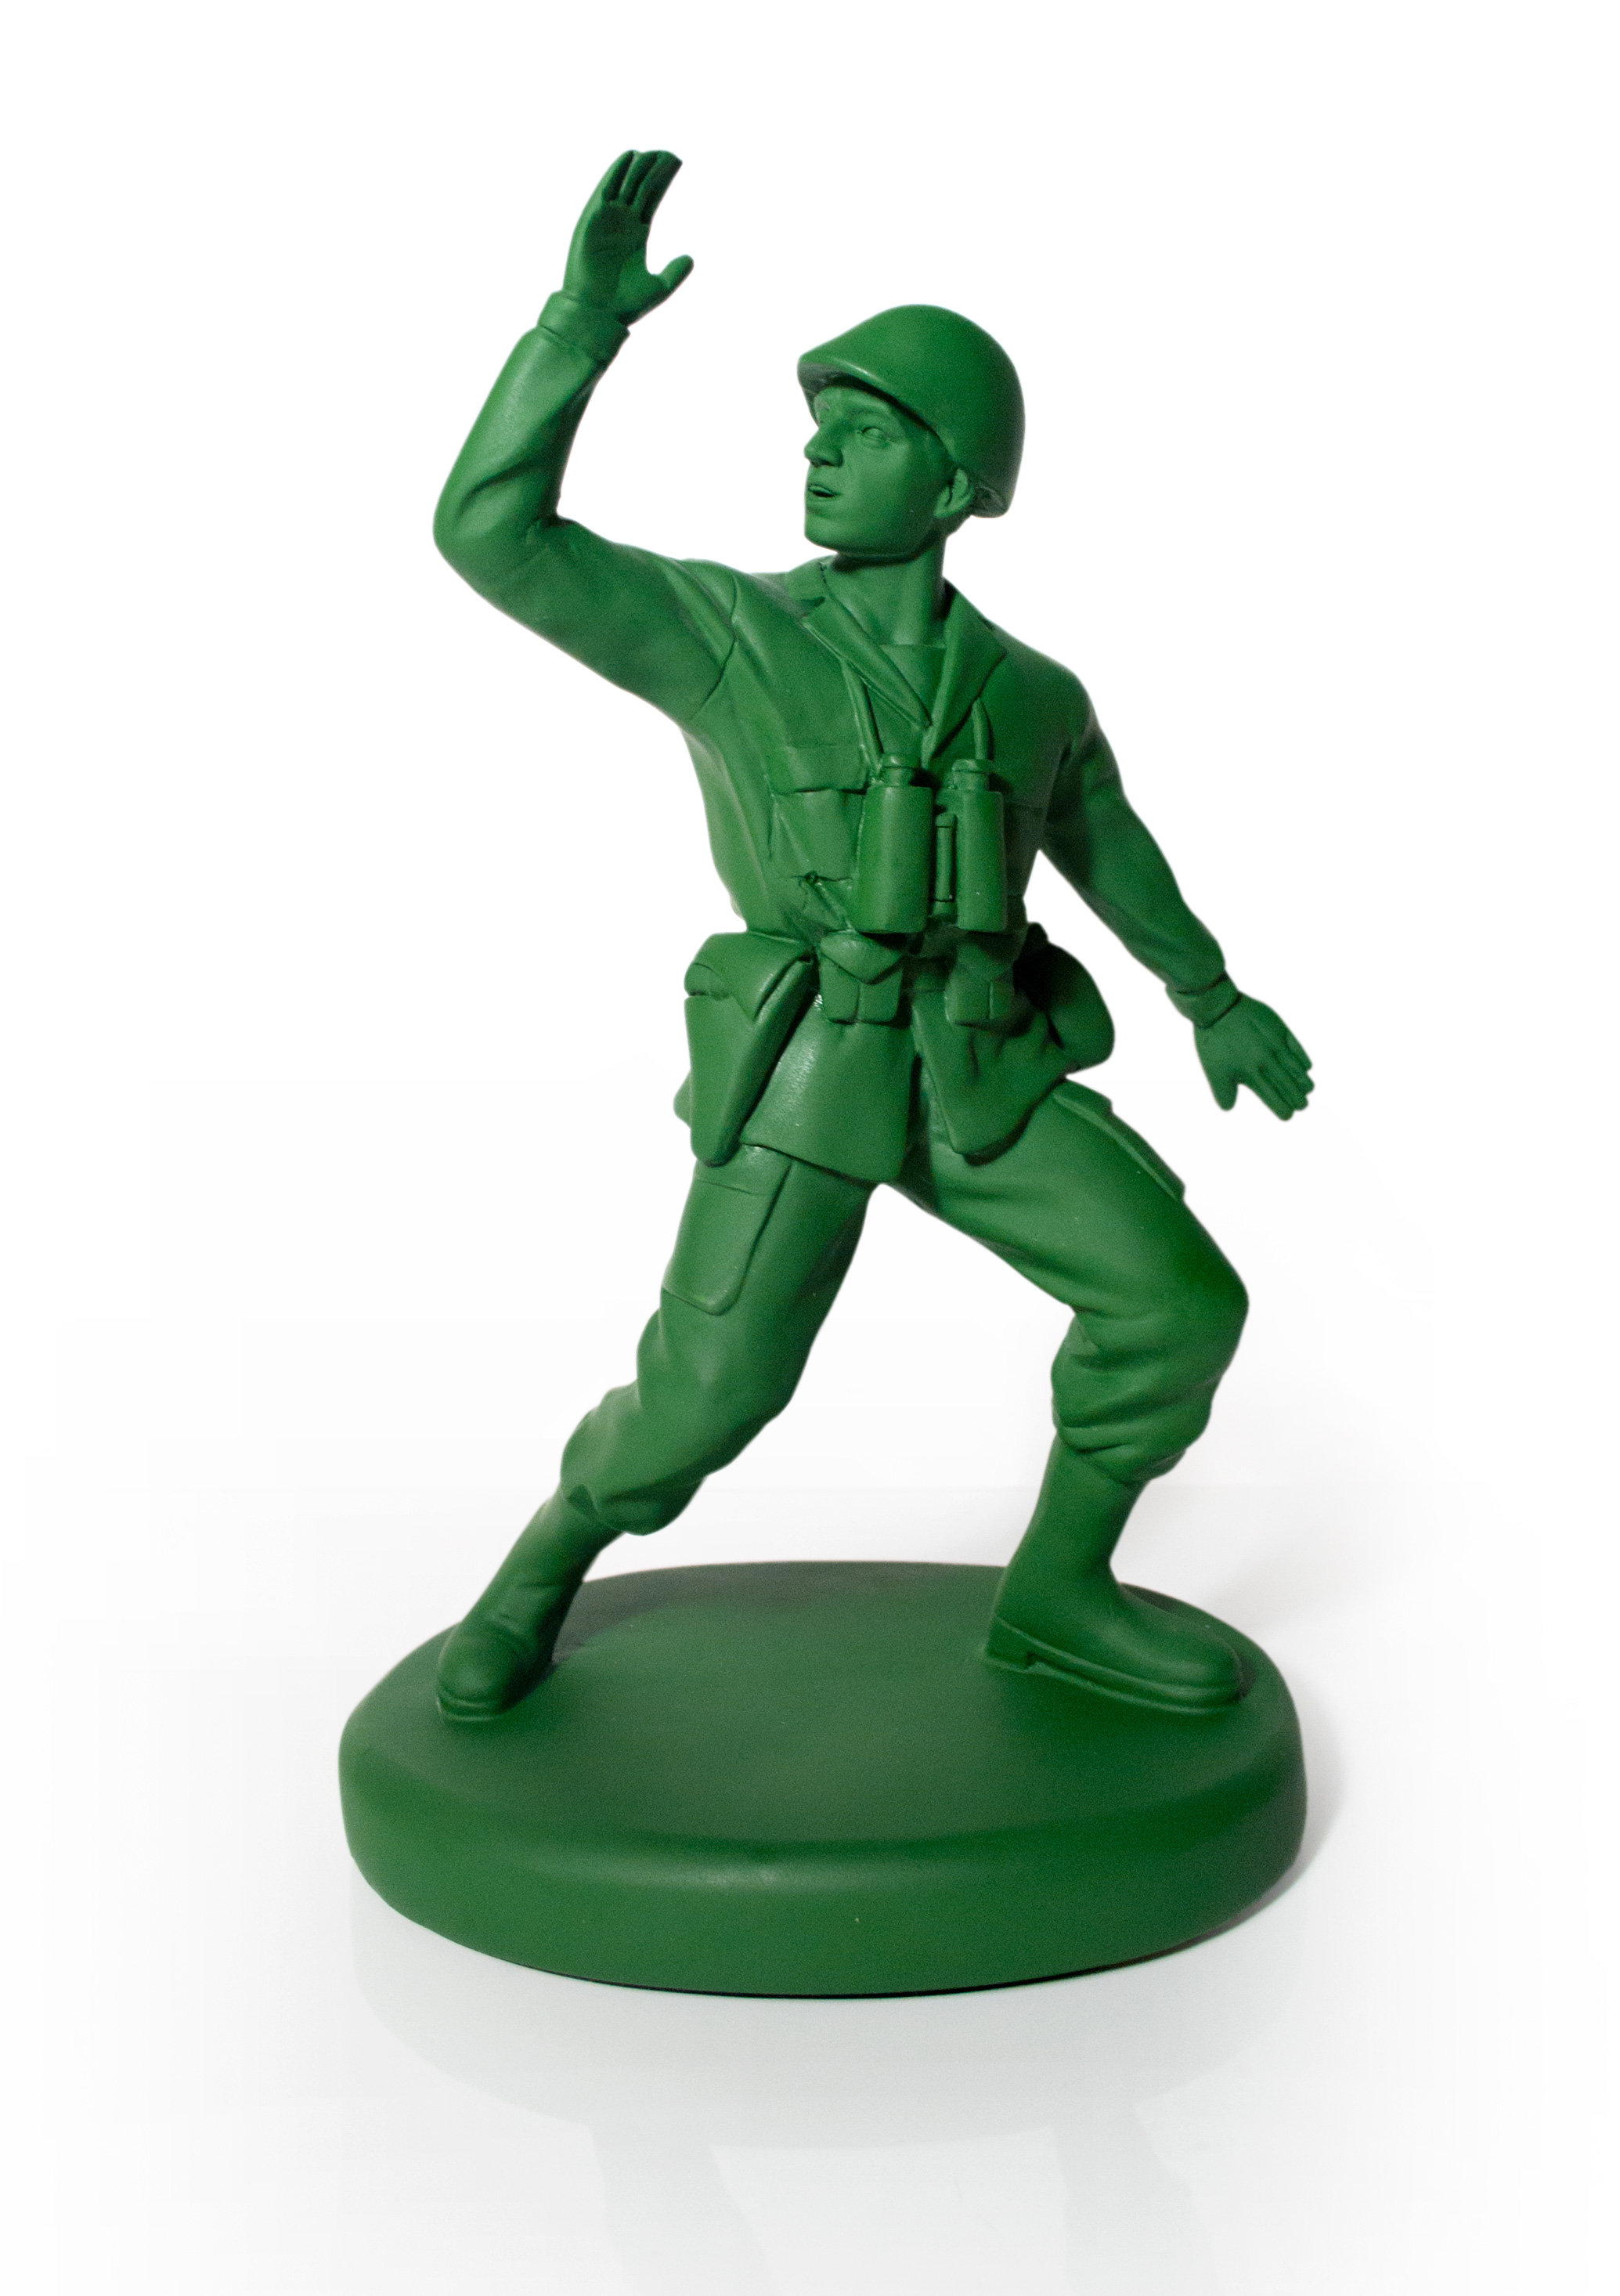 Home Guard Content Gallery Doorstop & Bookend giant toy soldiers.